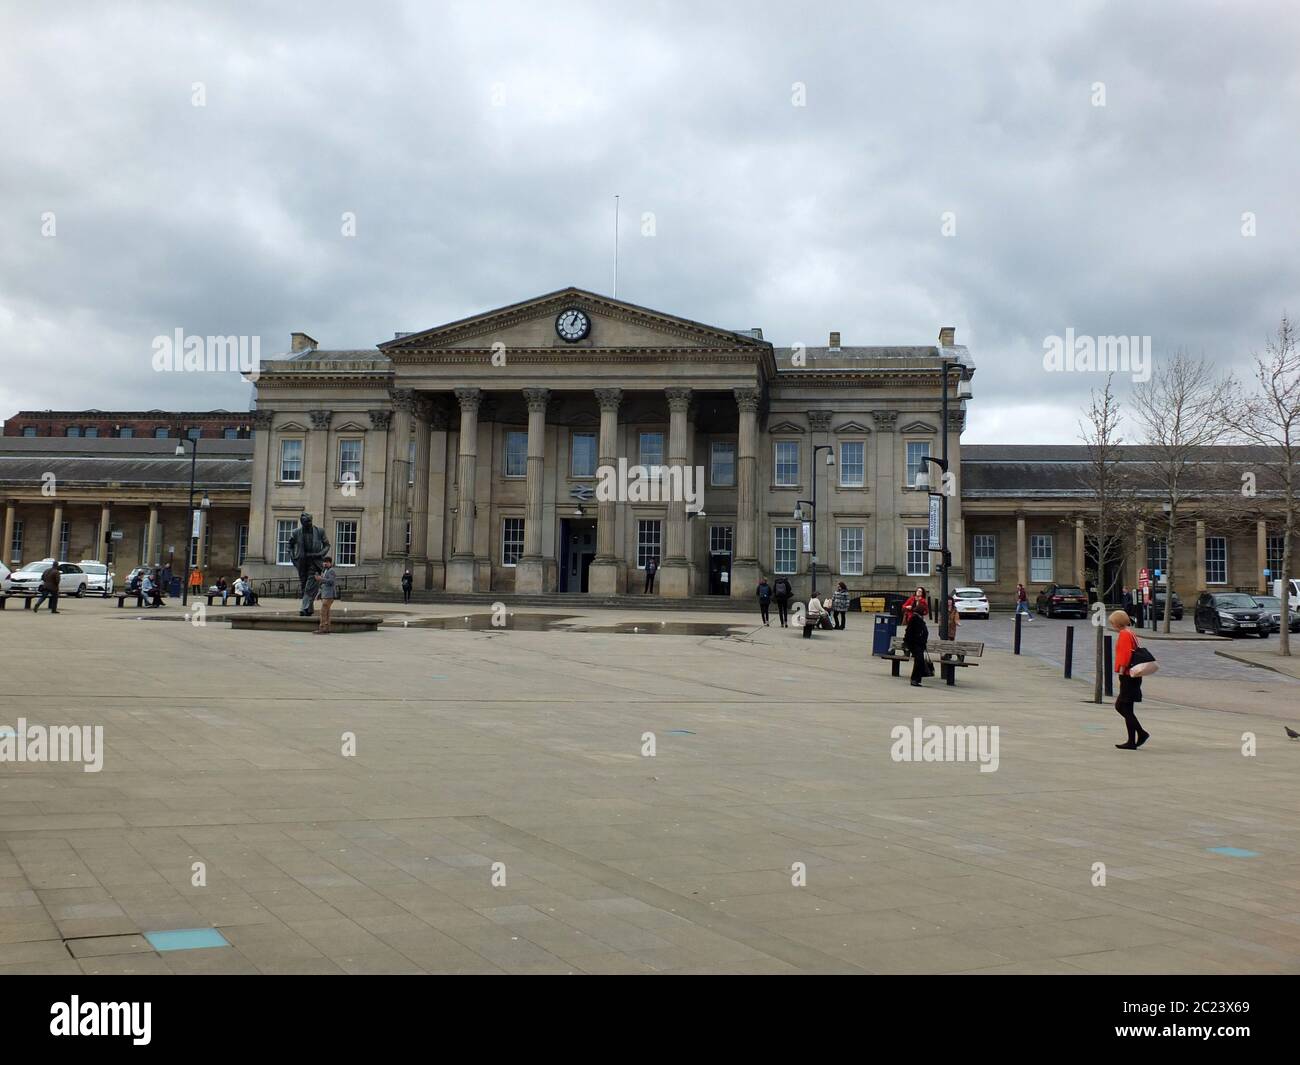 Huddersfield, West Yorkshire, England - April 26, 2018: Pedestrians in St Georges Square walk past the historic railway station Stock Photo